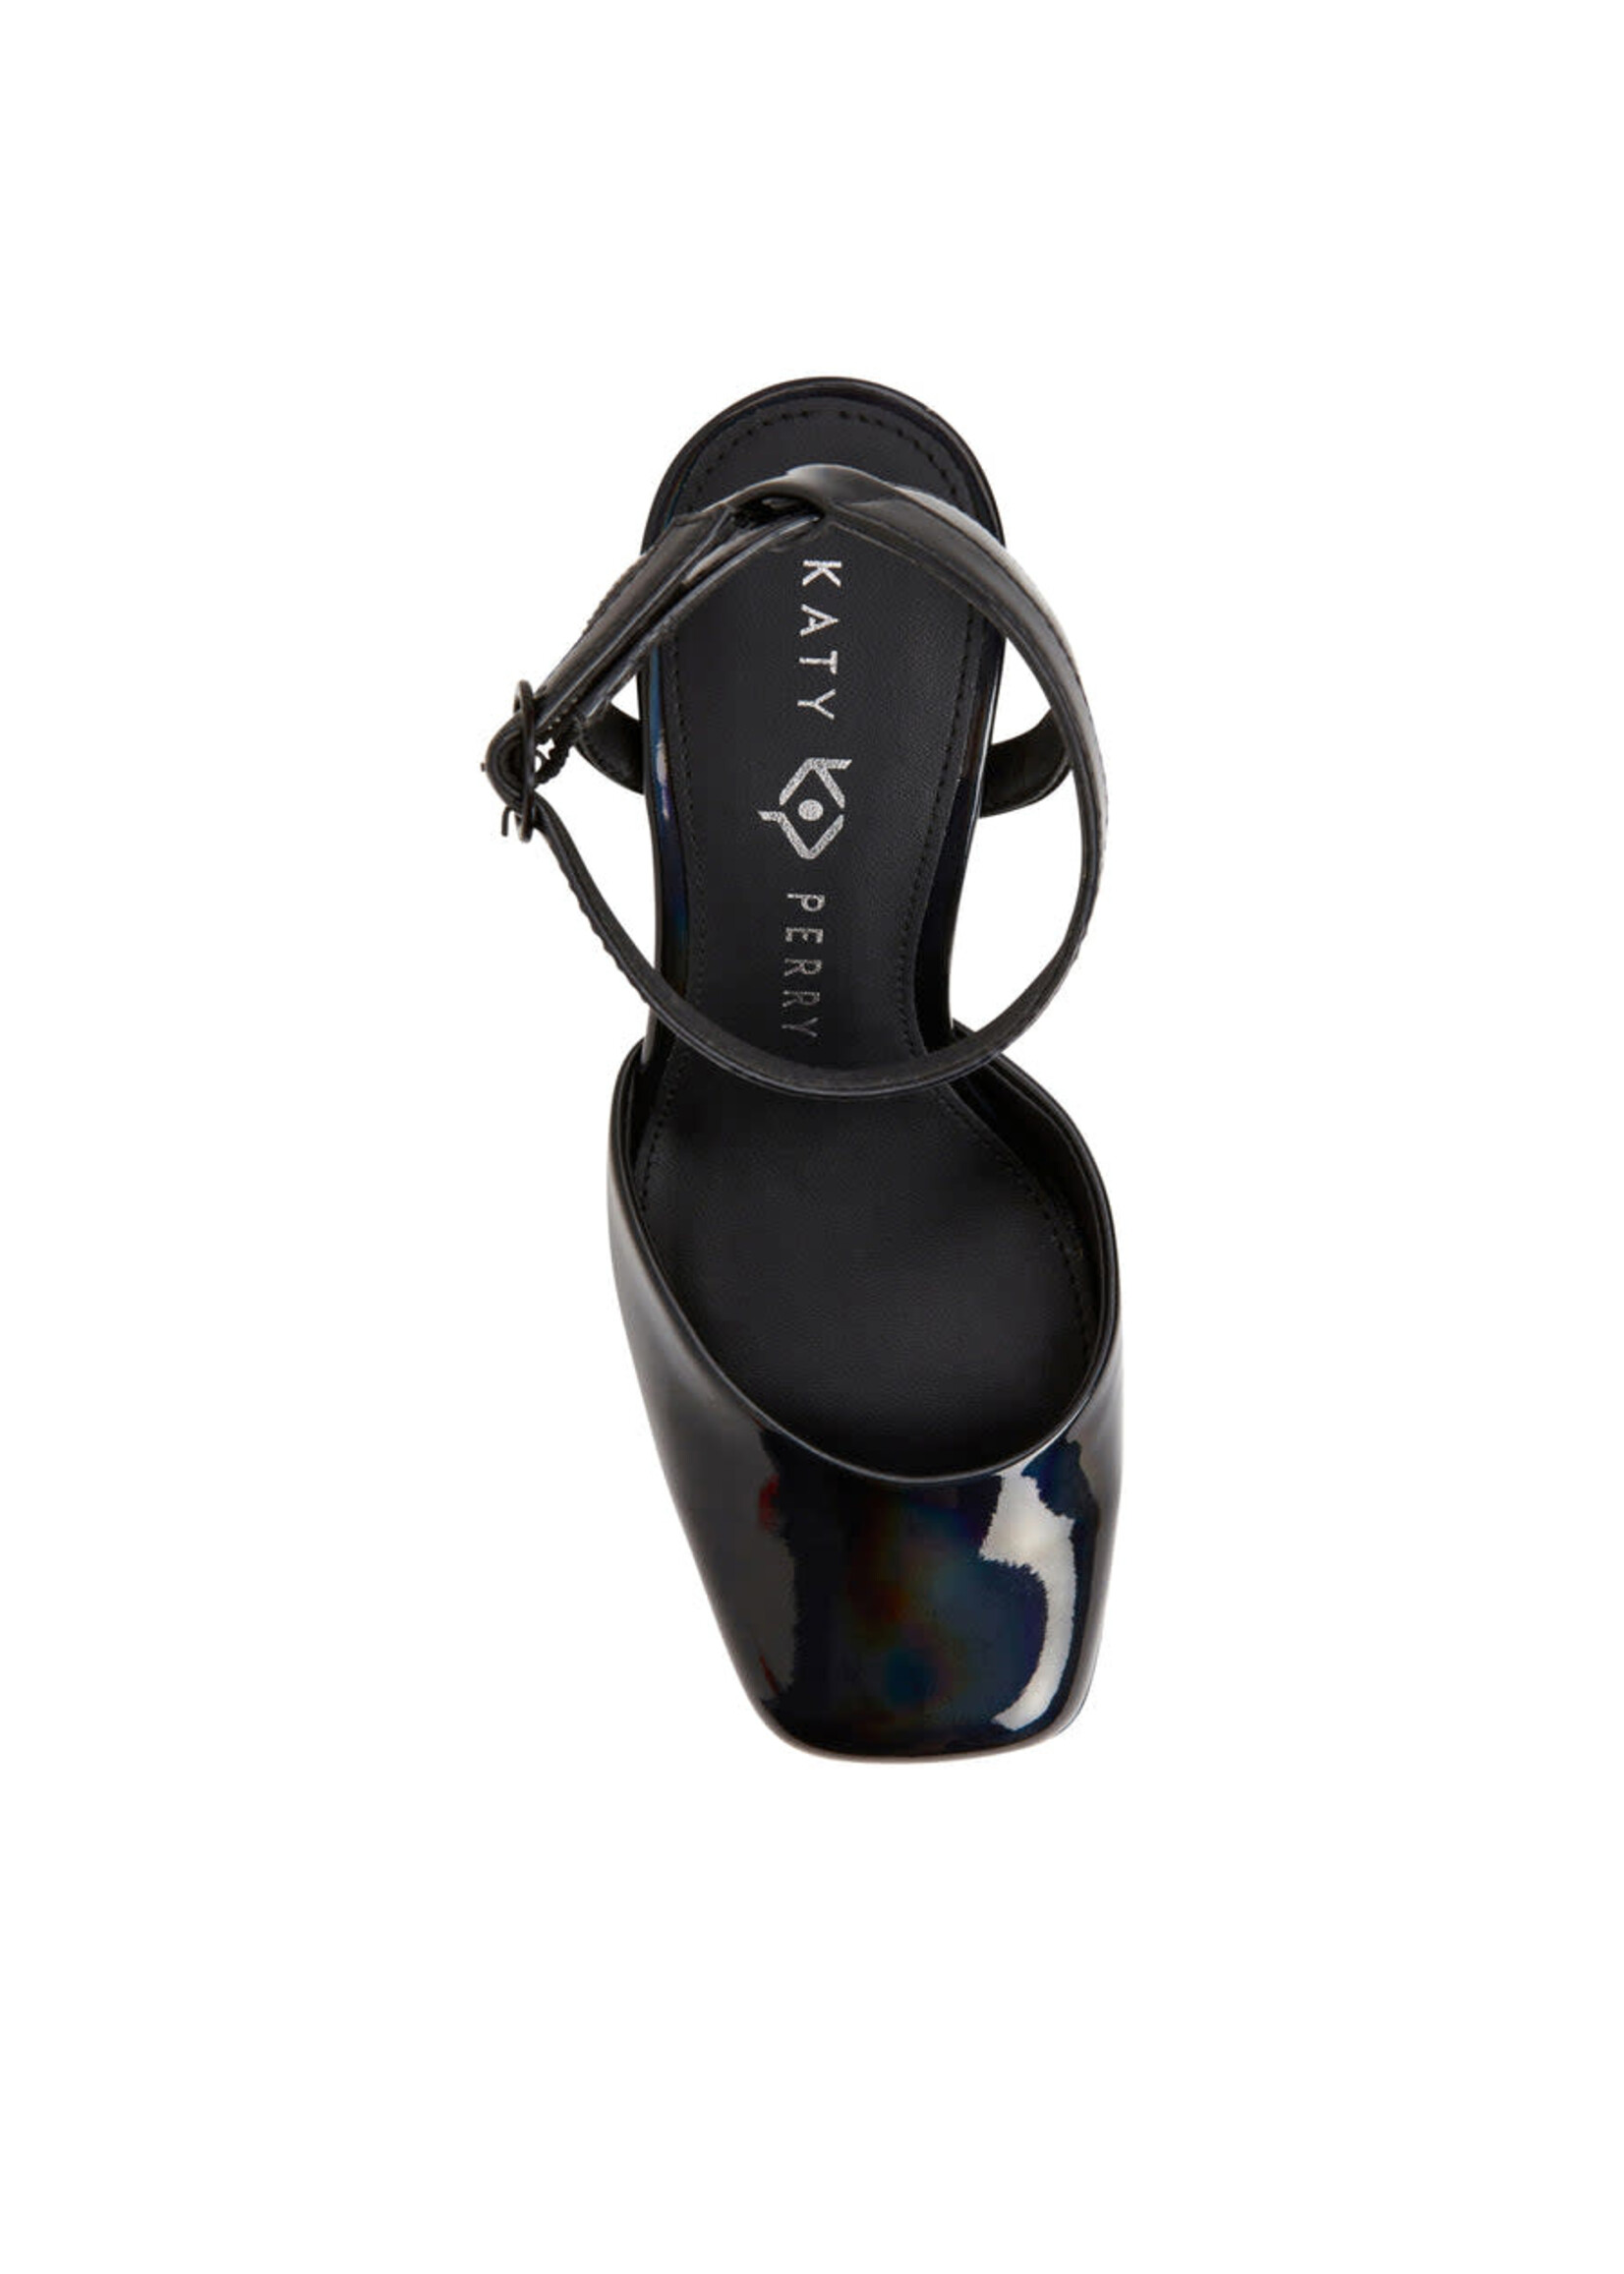 Katy Perry The Uplift Ankle Strap Black Patent by Katy Perry